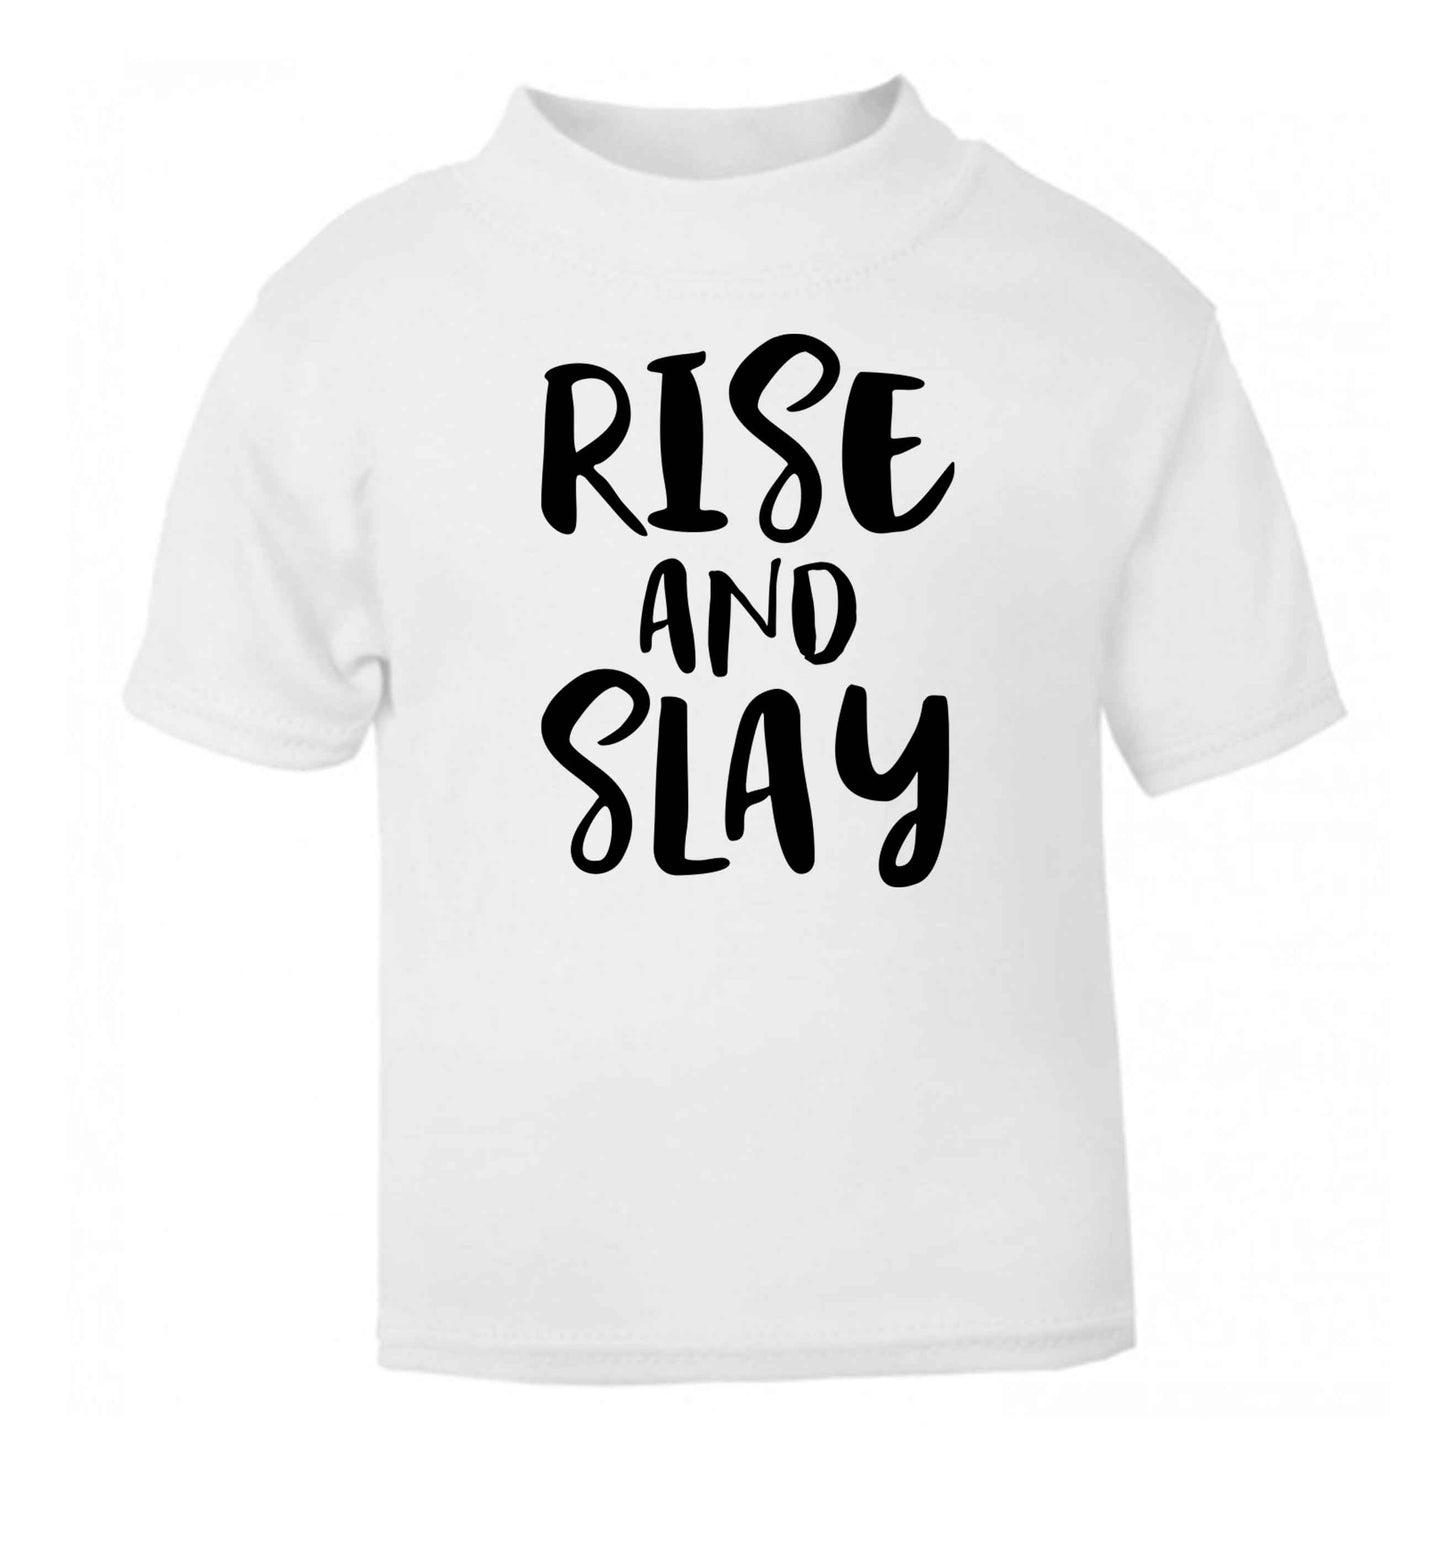 Rise and slay white Baby Toddler Tshirt 2 Years